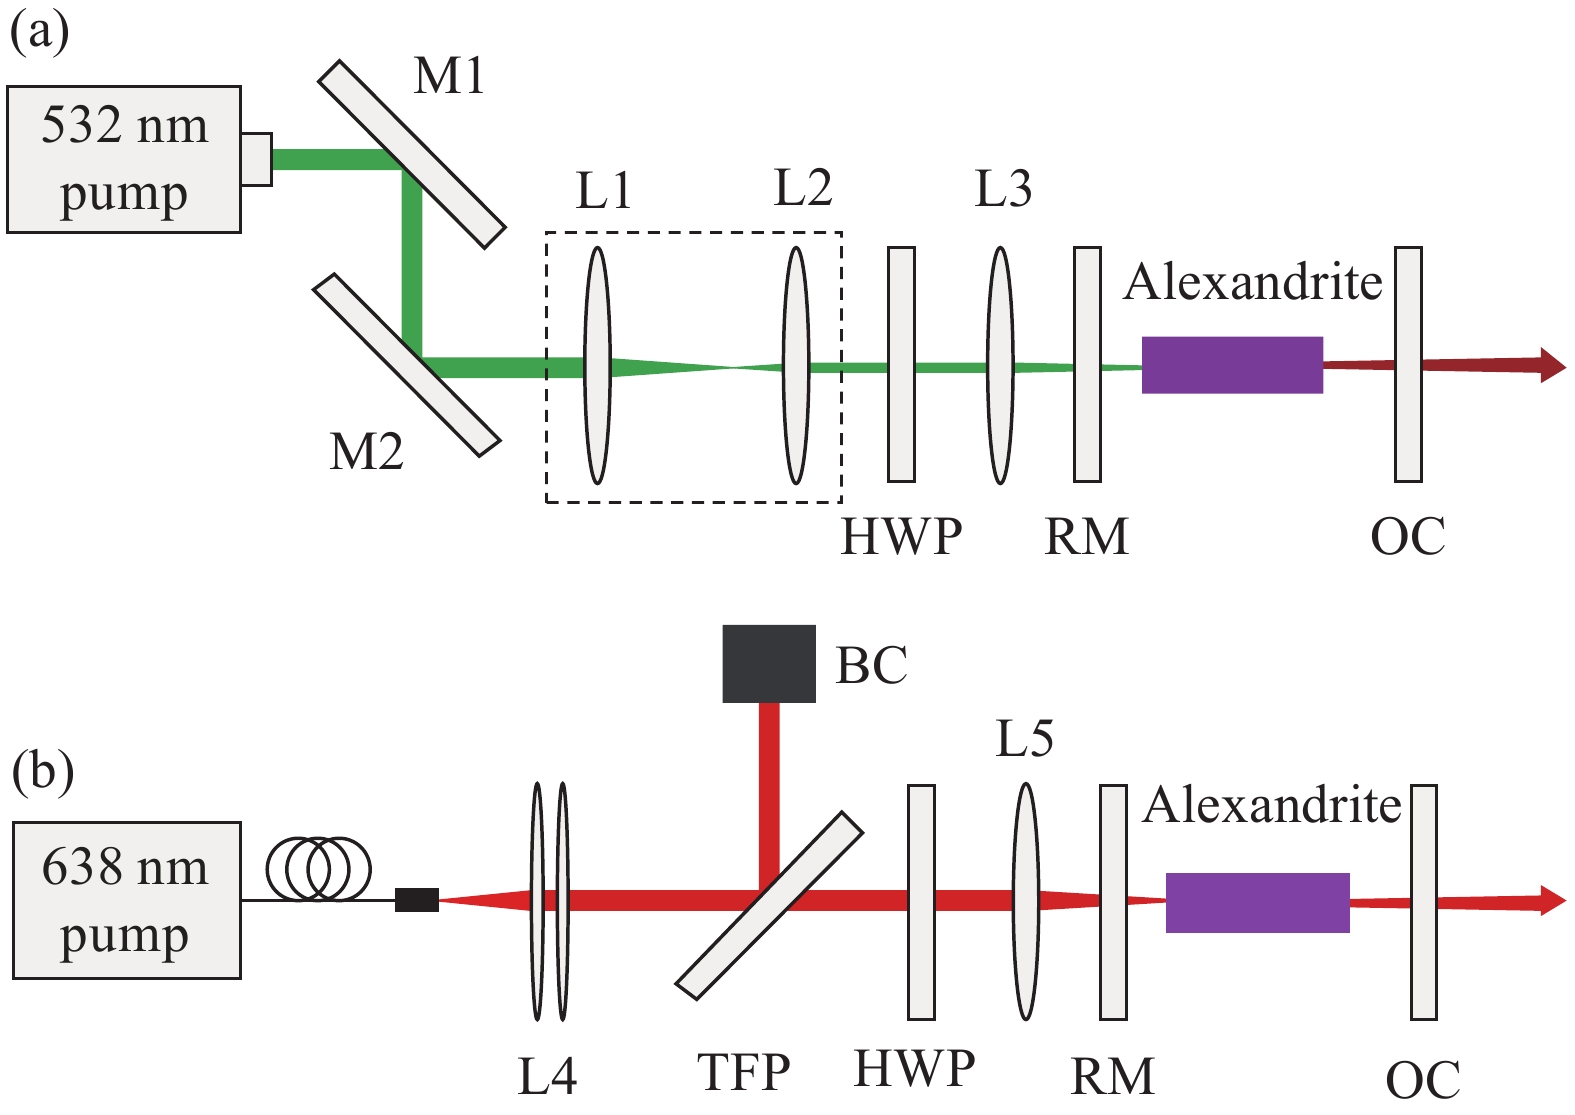 (a) Schematic of Alexandrite laser single-end-pumped by a 532 nm solid-state laser. (b) Schematic of Alexandrite laser single-end-pumped by a 638 nm LDs. M1-M2, high reflection mirrors; HWP, half-wave plate; RM, rear mirror; OC, output coupler; L1-L5, convex lenses; BC, beam collector; TFP, thin film polarizer